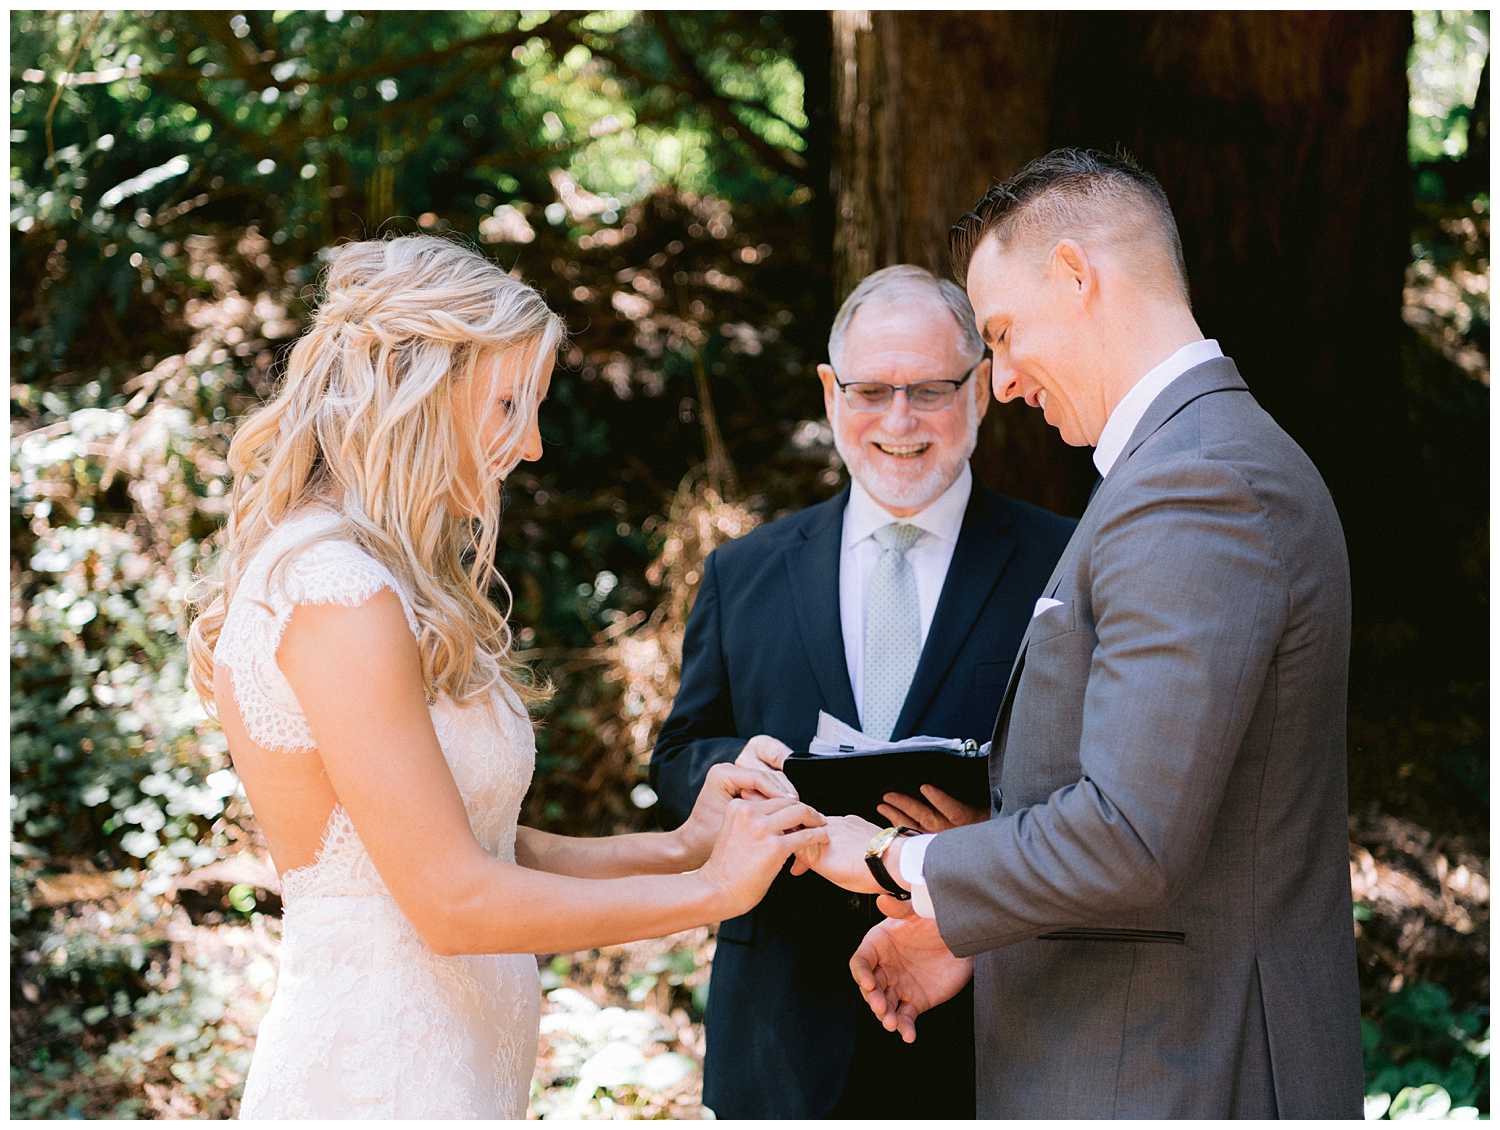 Kelsey placing Mitchell's wedding band on his ring finger